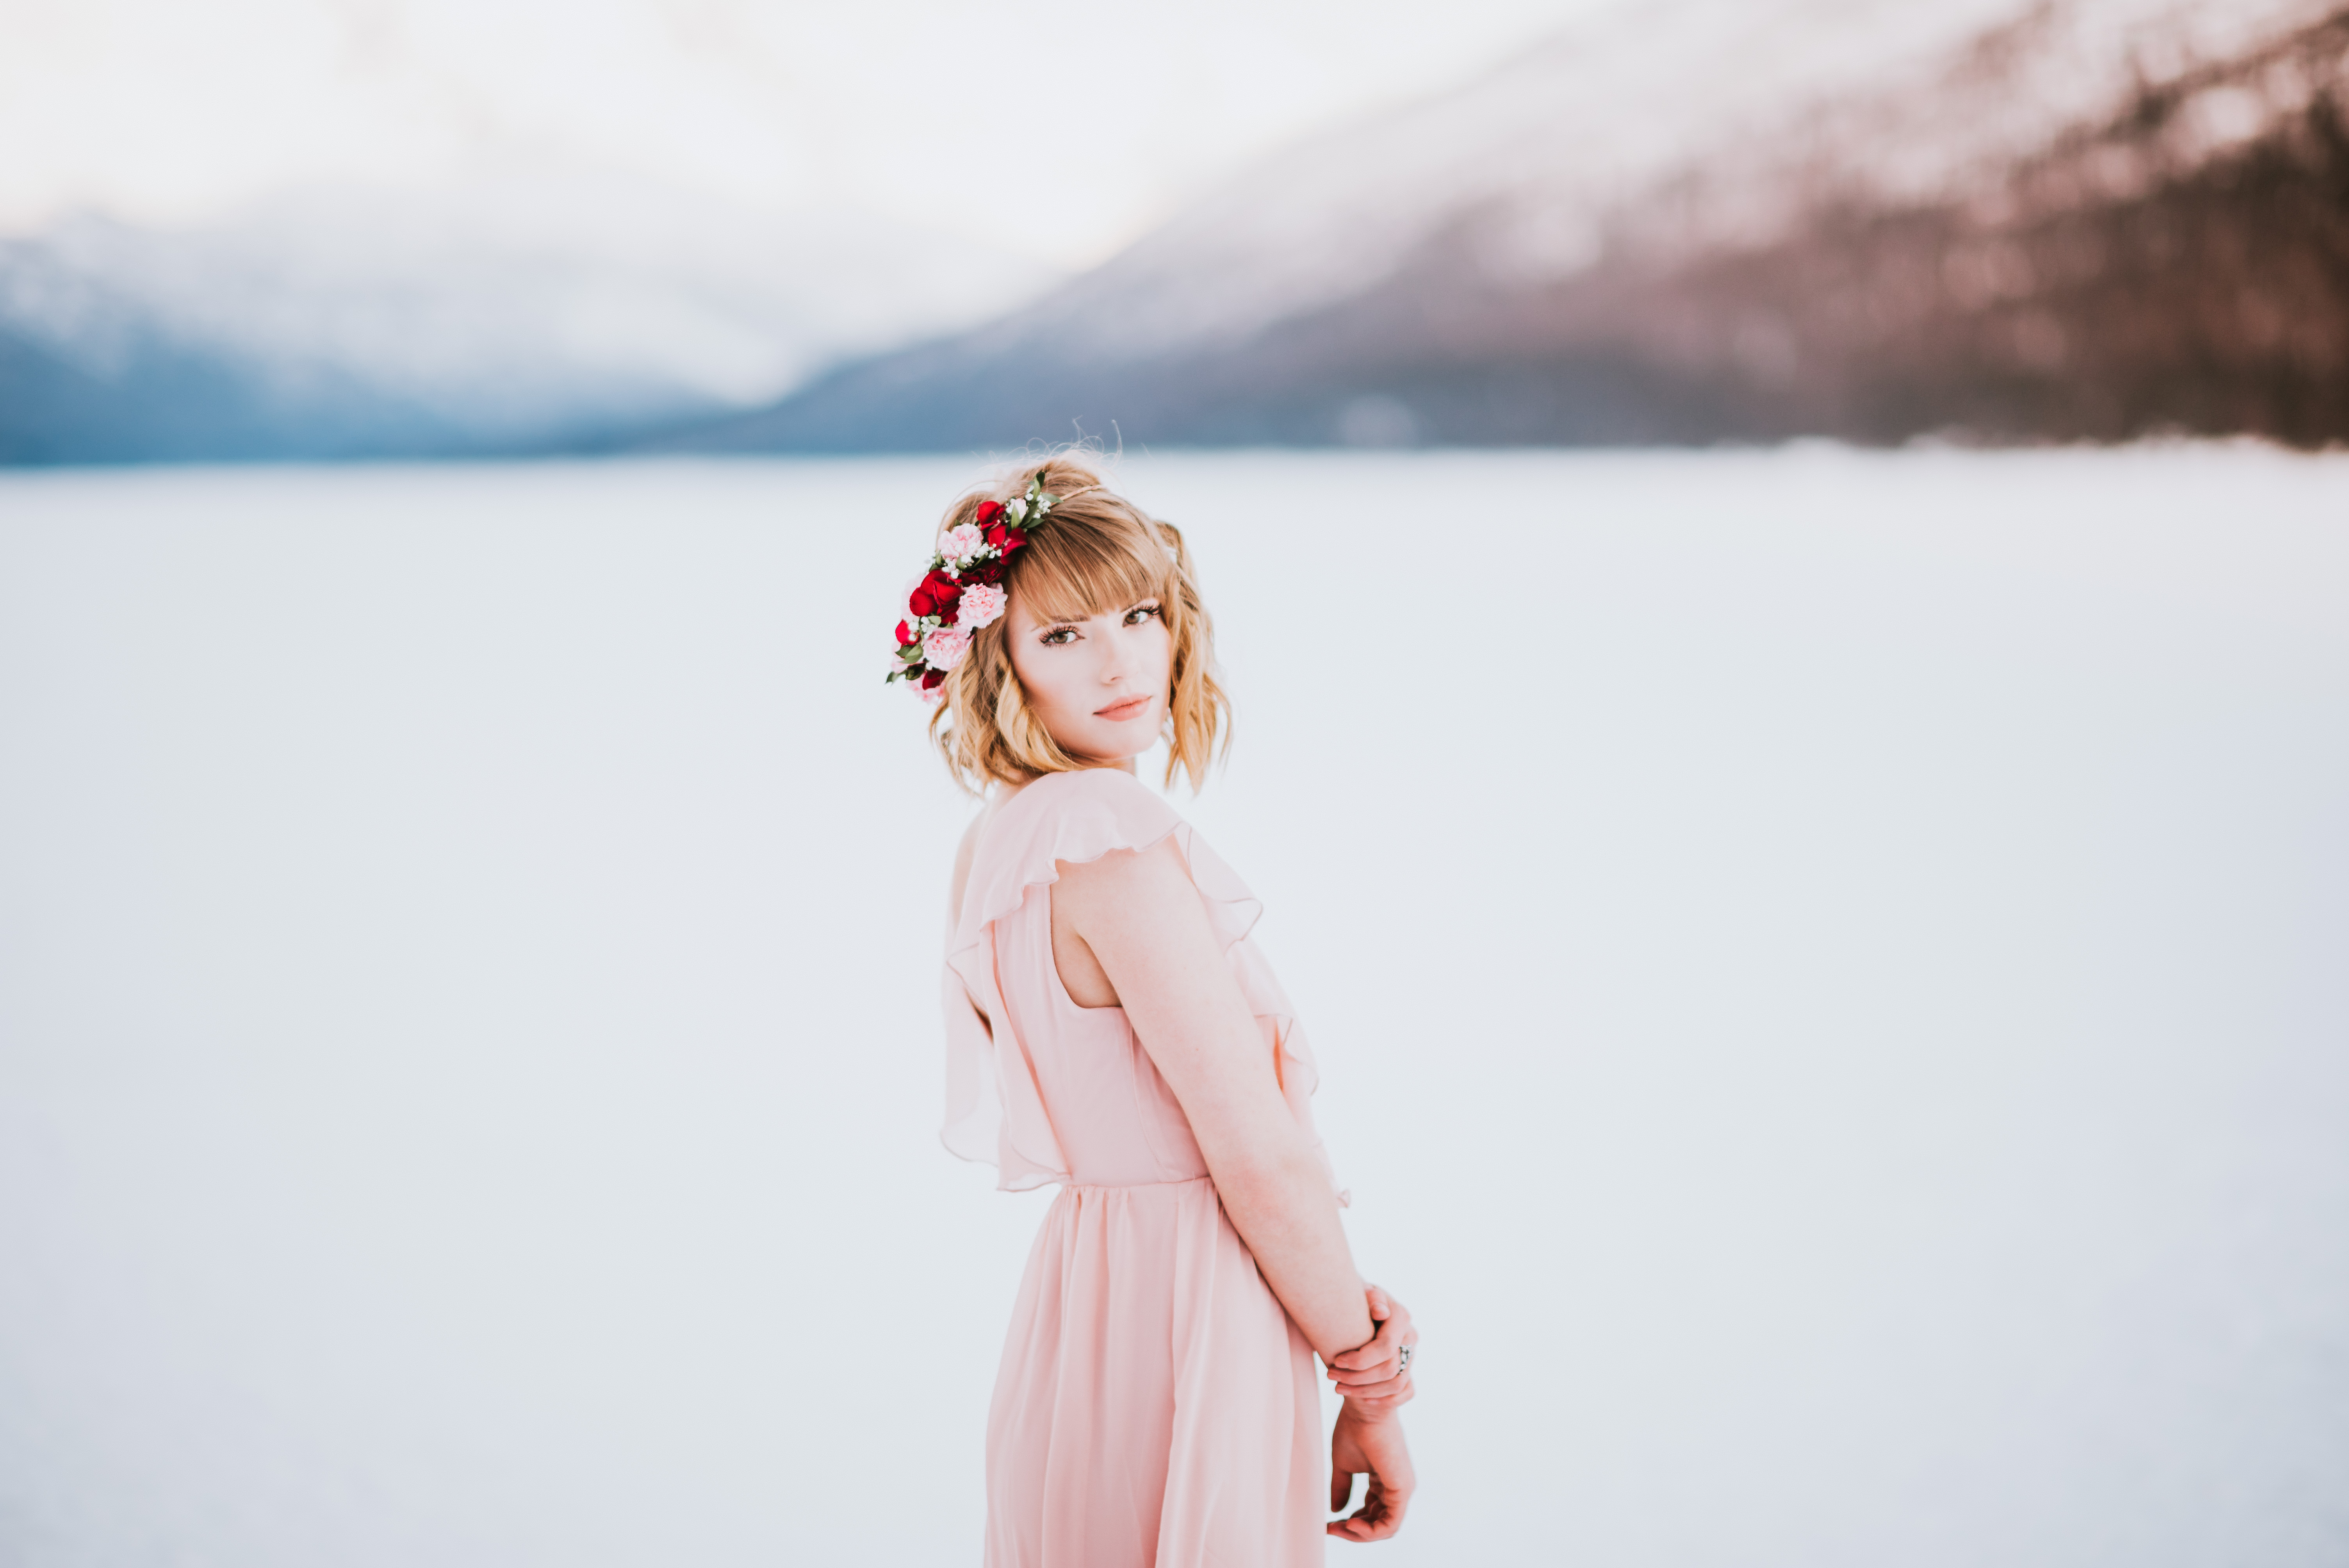 Partial flower crown on Eklutna Lake | designed by Natasha Price of Paper Peony Alaska and Photo by Donna Marie Photography